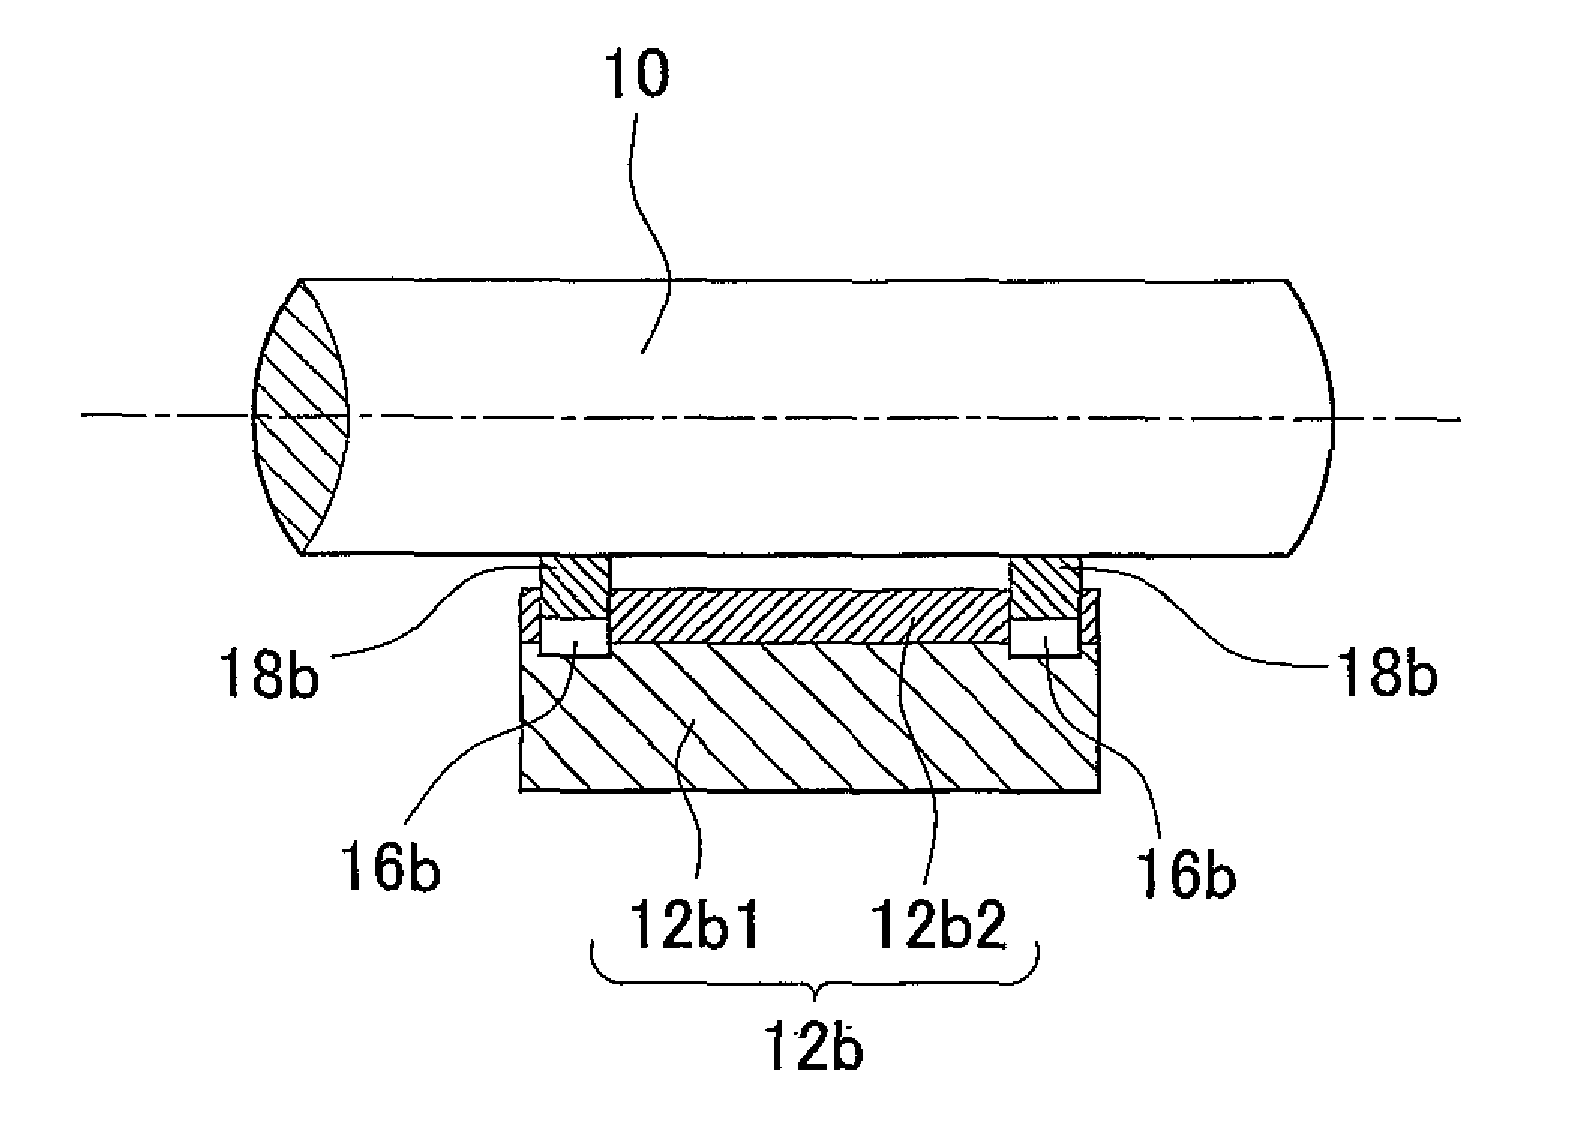 Sliding bearing structure for a shaft member